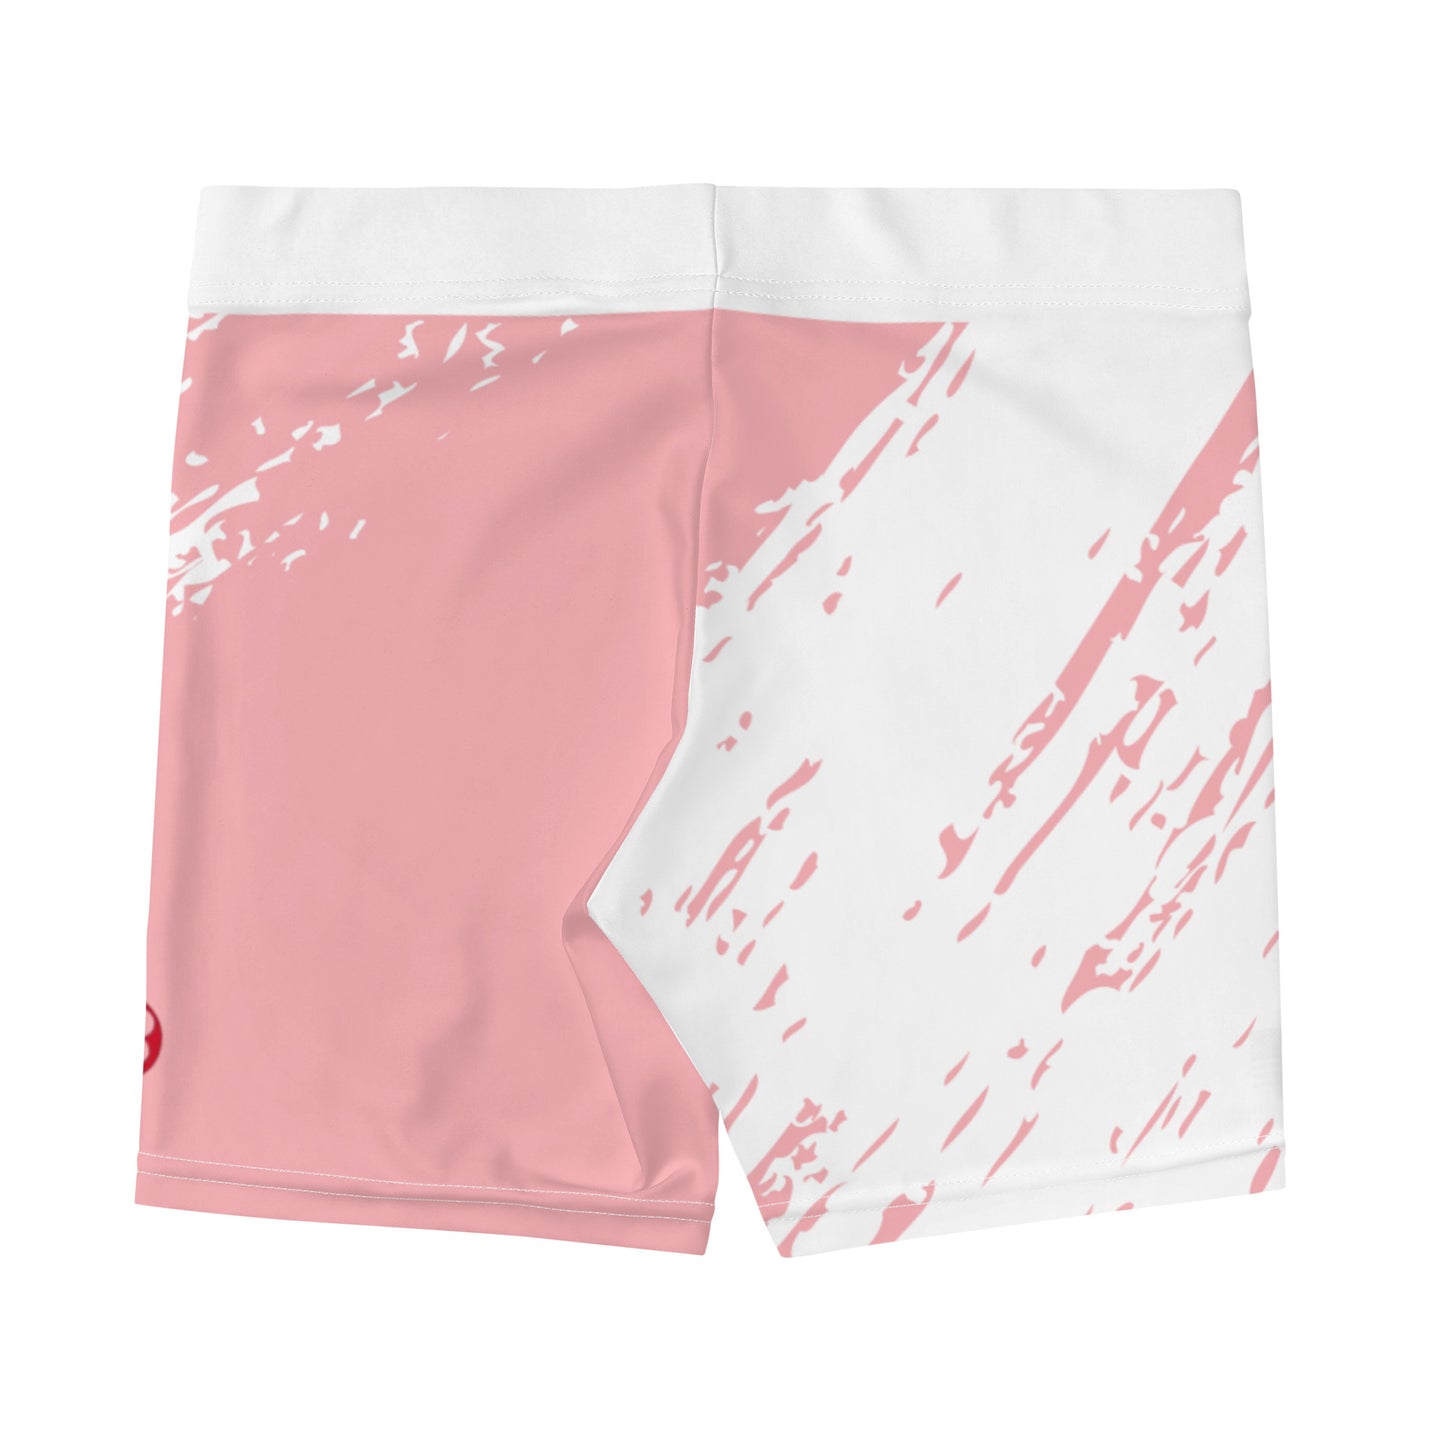 2Bdiscontinued. women's athletic shorts pnkrcr